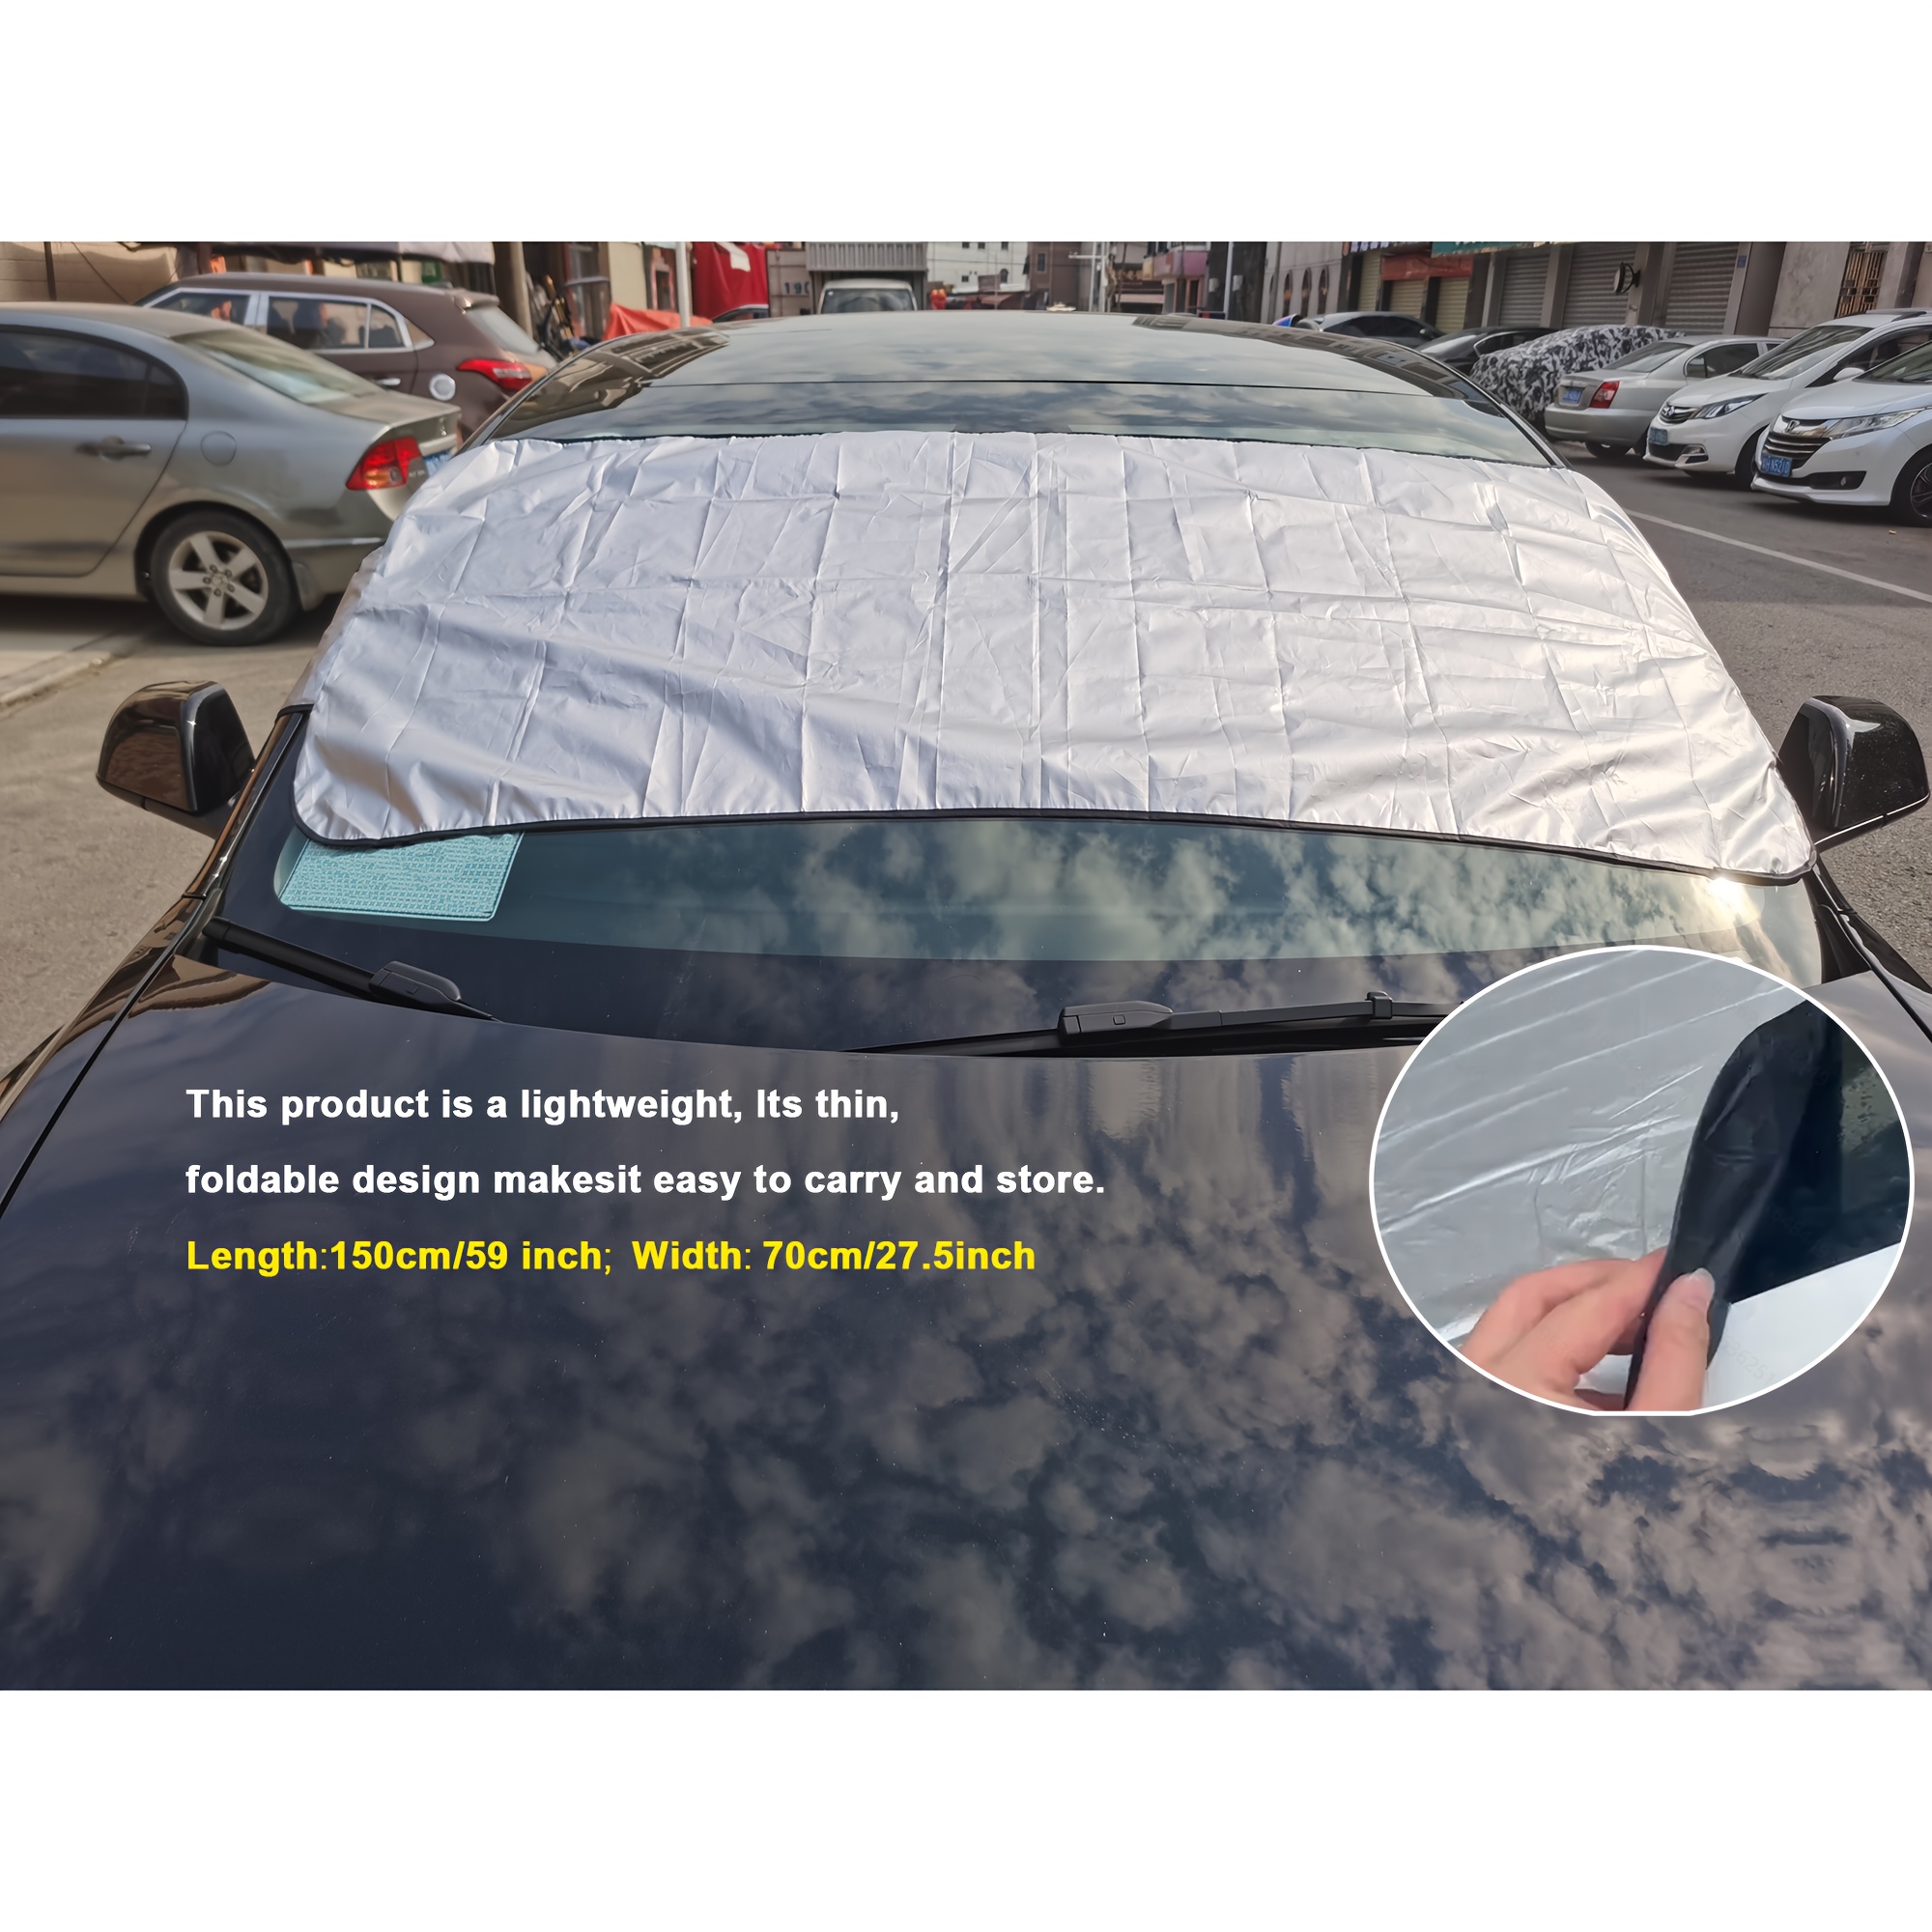 Keep the snow off your car with this windshield cover for just $12 (50% off)